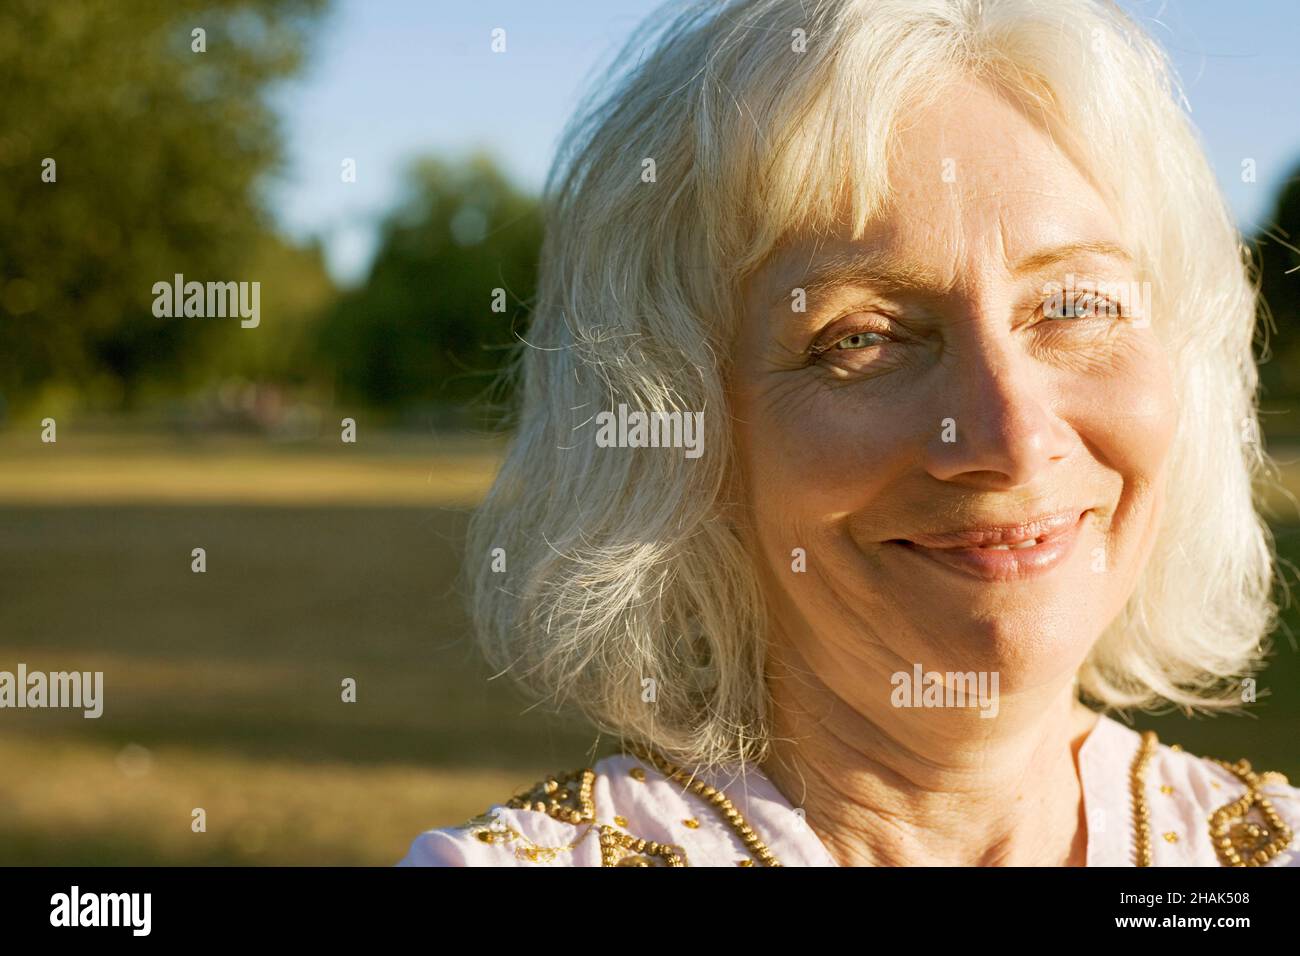 Portrait of senior woman with grey hair smiling. Stock Photo